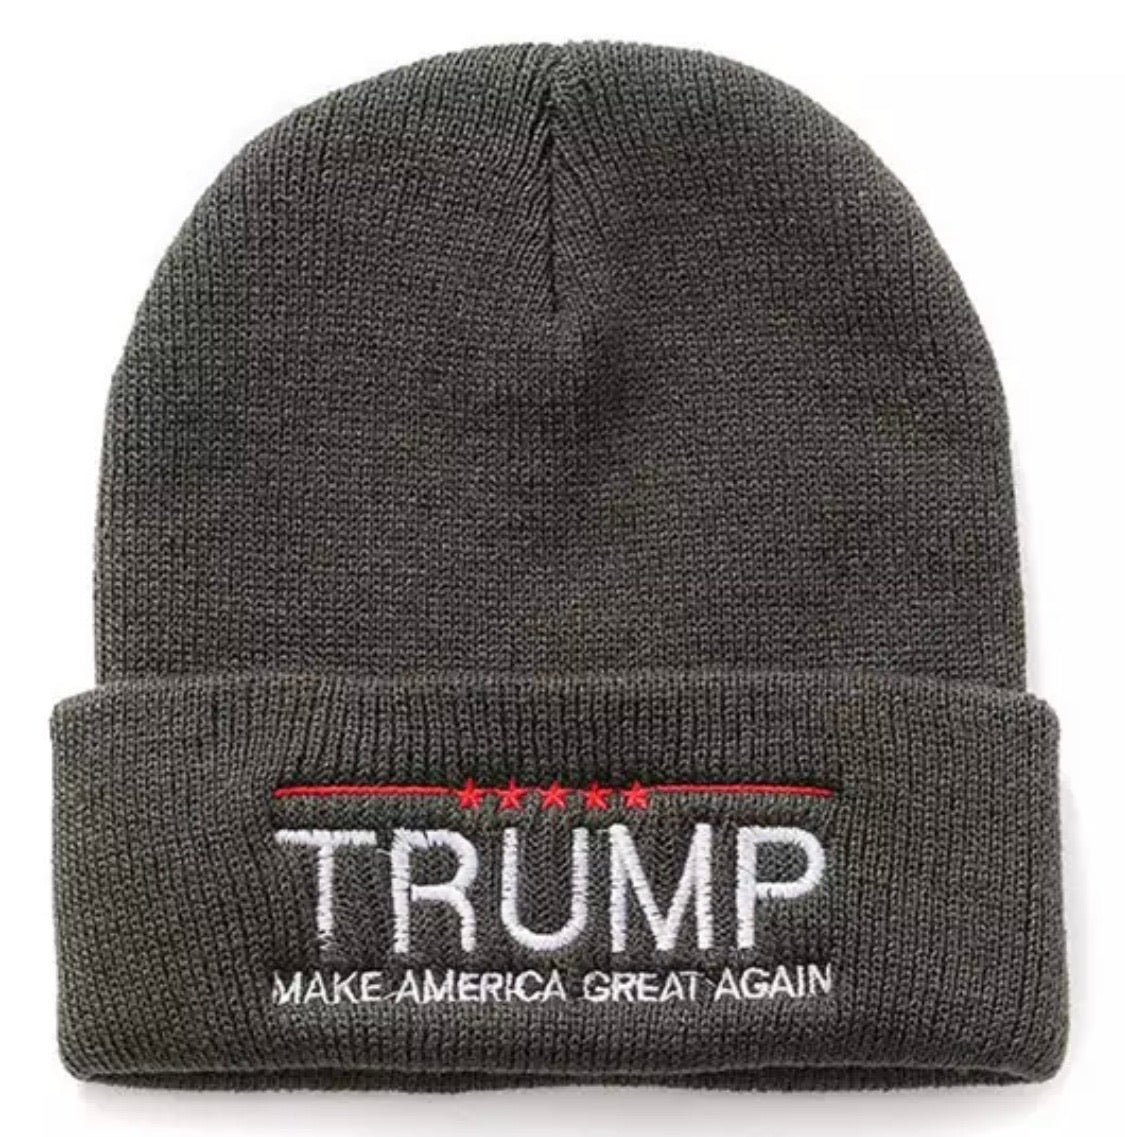 Hats { Trump } Make America Great Again. Embroidered. 4 colors. Black, red, dark gray, light gray. Knit unisex beanie. - Stacy's Pink Martini Boutique